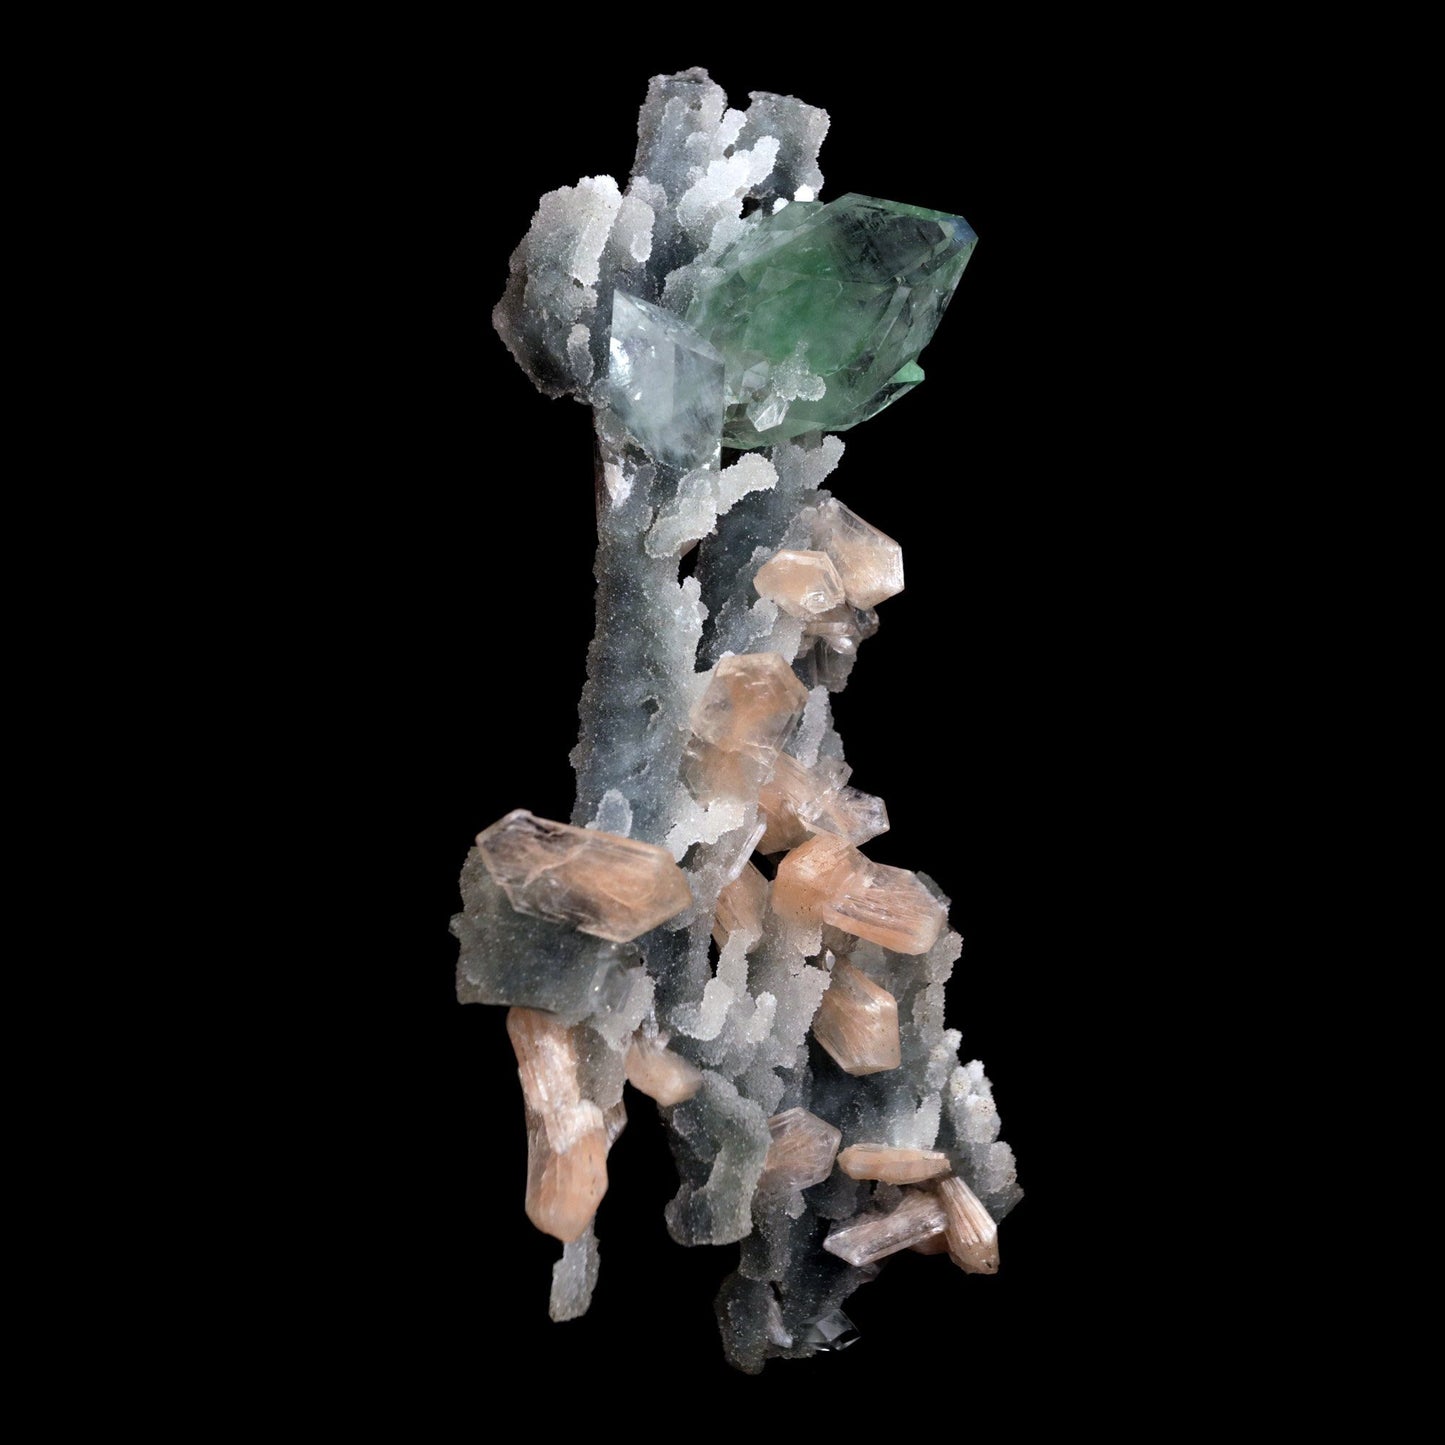 Green Apophyllite with Stilbite on Chalcedony Stalactite Natural Miner… https://www.superbminerals.us/products/green-apophyllite-with-stilbite-on-chalcedony-stalactite-natural-mineral-specimen-b-4841 Features: Apophyllite crystals are glossy and crisp, with tiny bladed white Stilbite on pastel purplish Chalcedony stalactites on matrix in this great show specimen. Fantastic condition